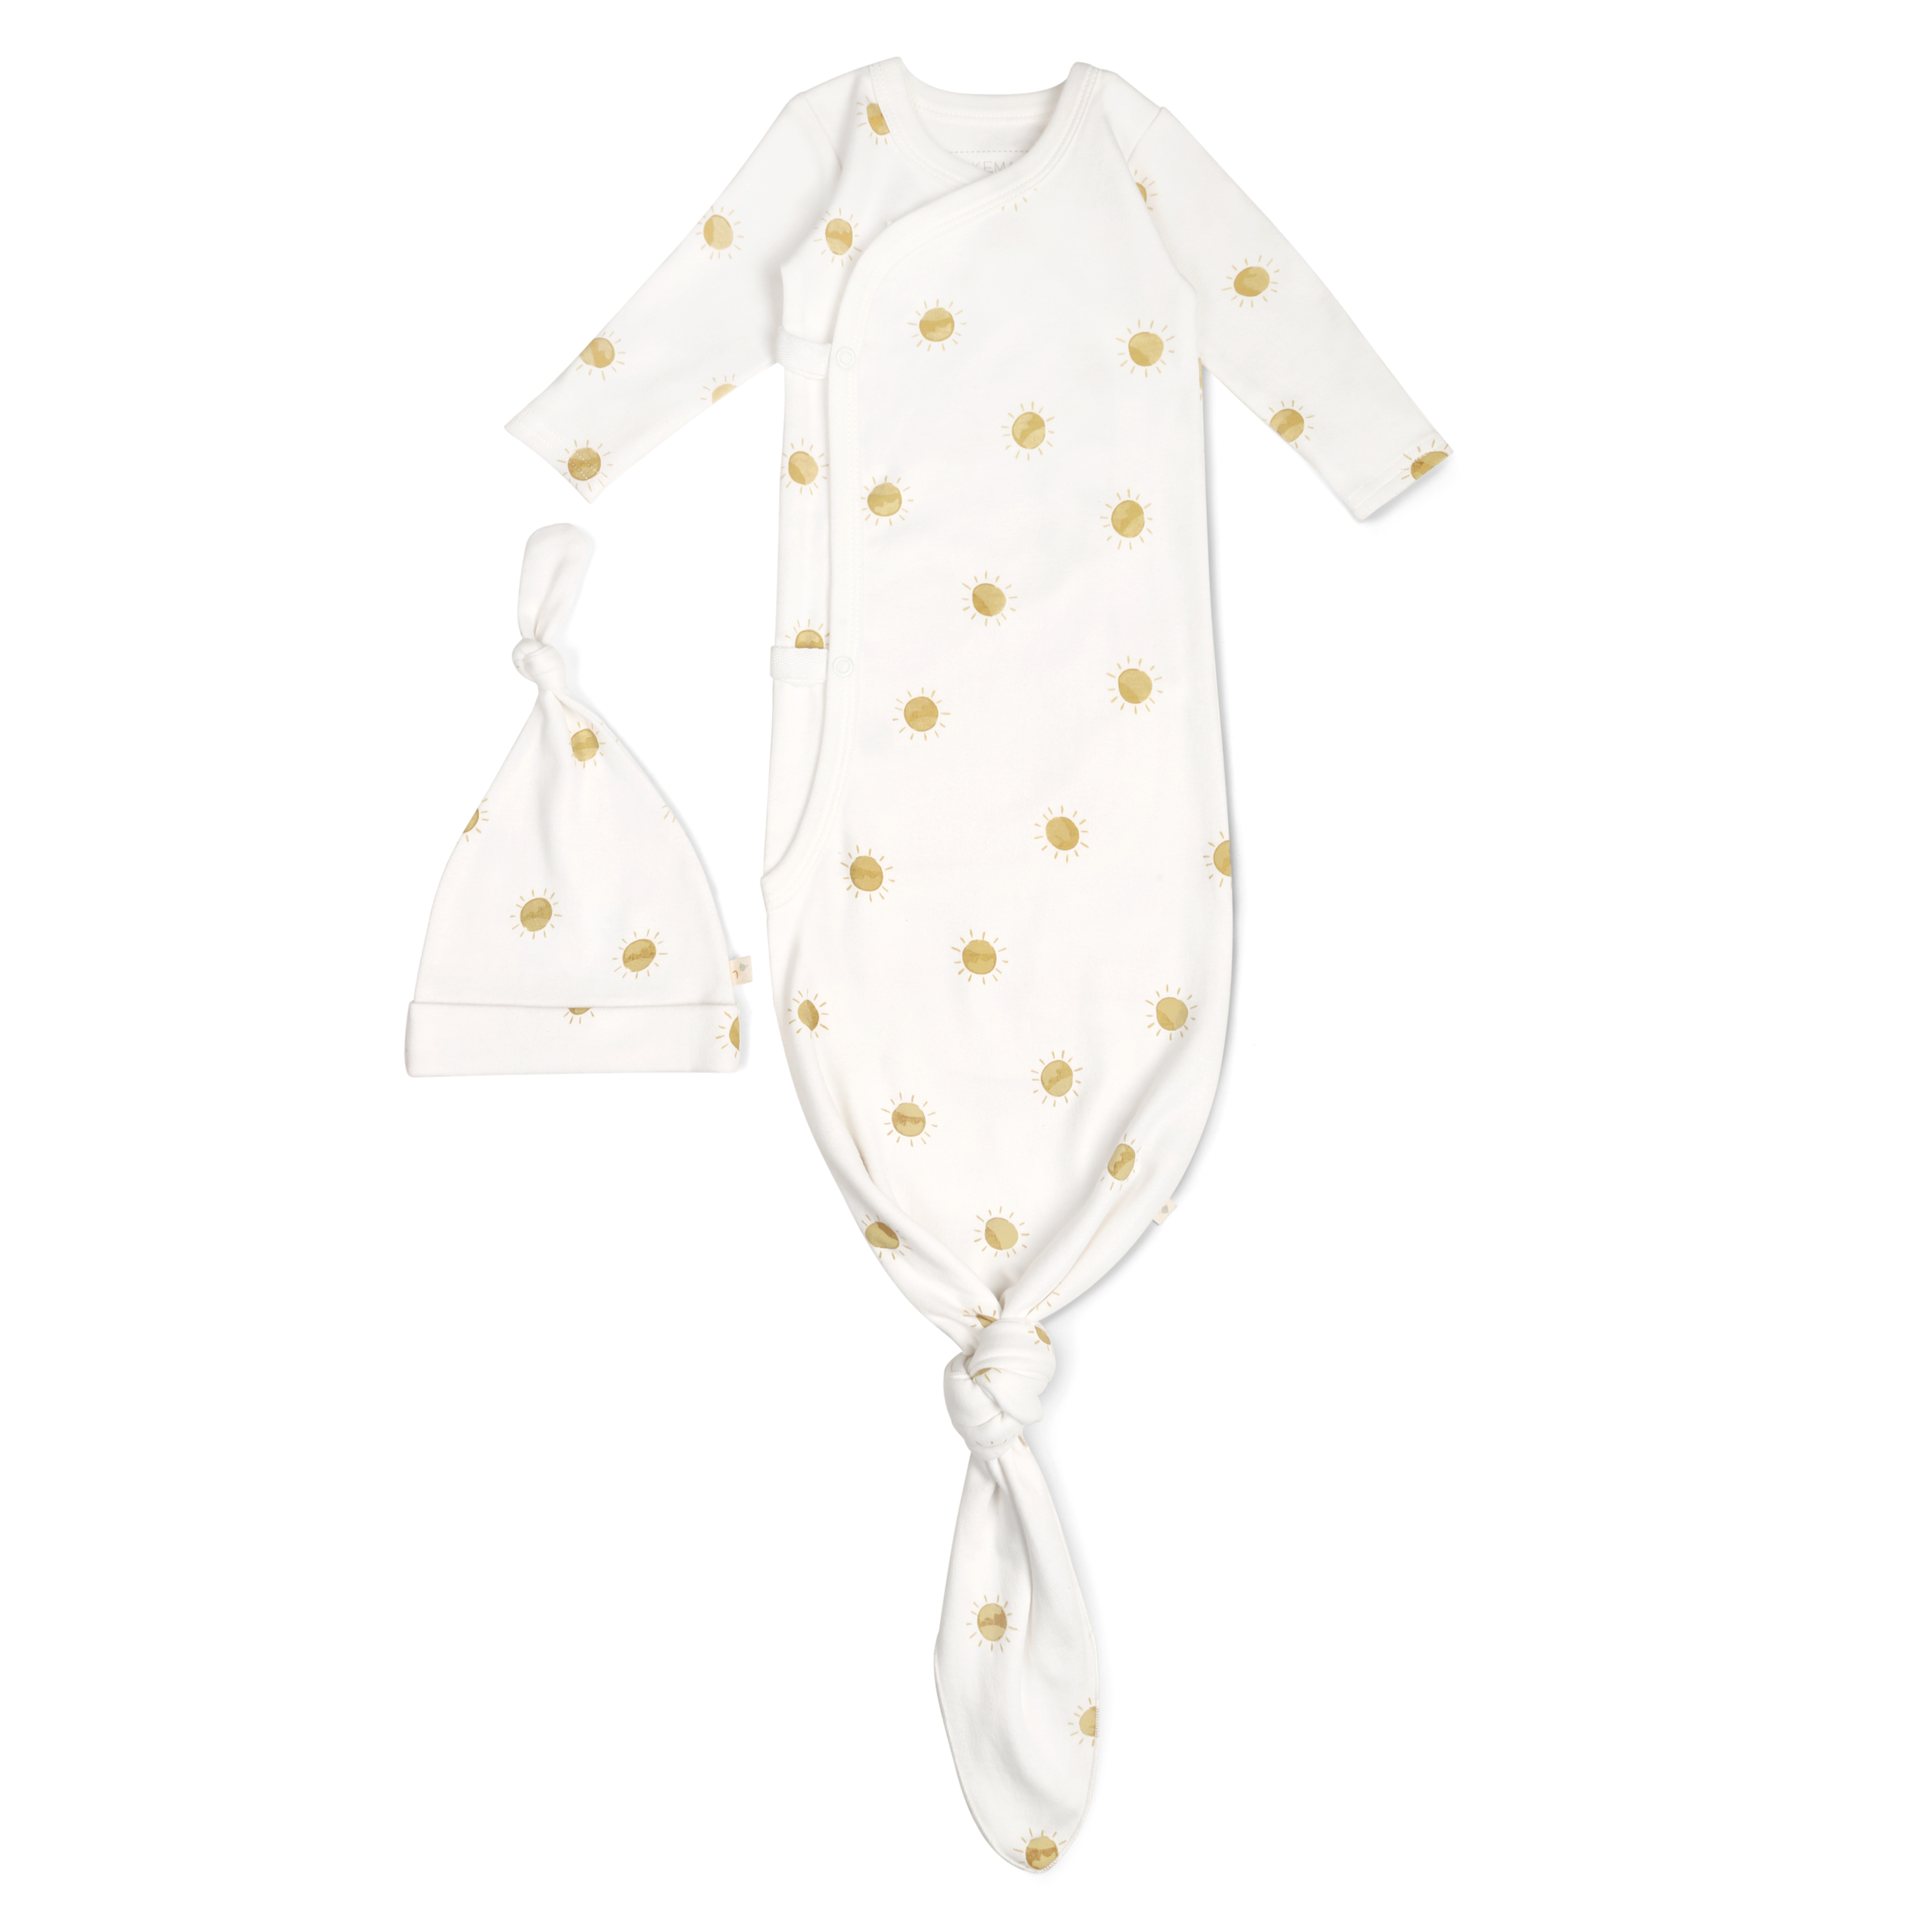 A white toddler sleeper with knotted bottom and matching hat, both adorned with a delicate golden floral pattern, displayed on a white background.(Product Name: Organic Kimono Knotted Sleep Gown - Sunshine Brand Name: Makemake Organics)